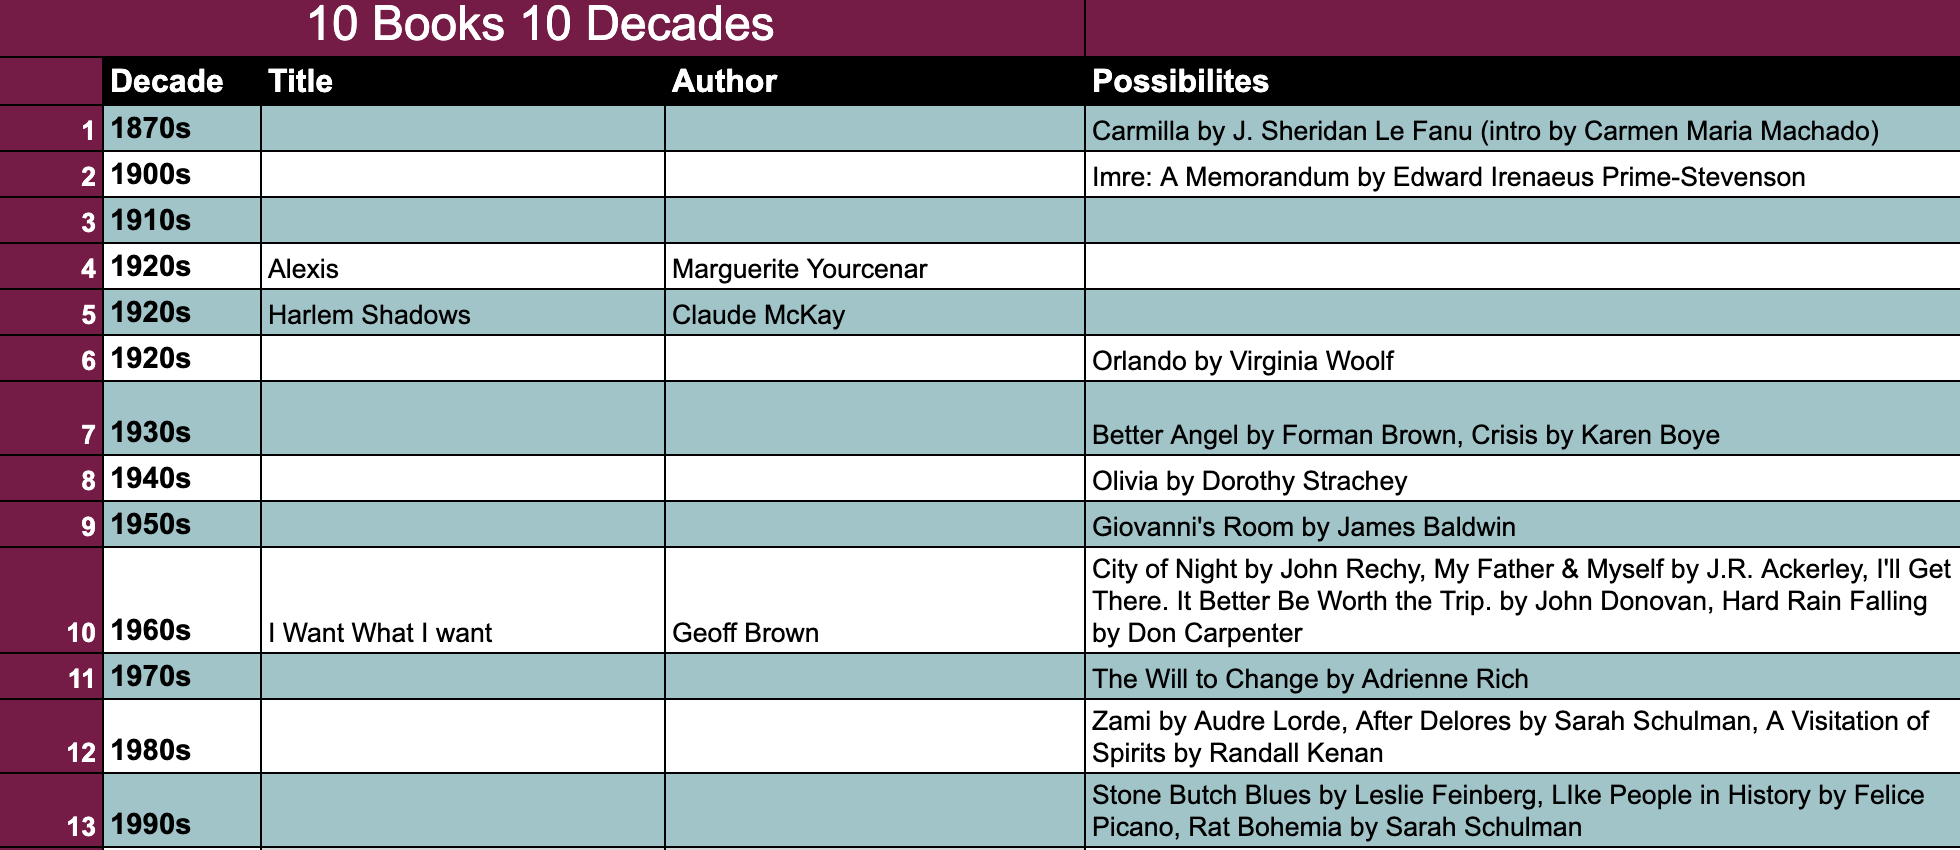 Screenshot of my 10 Books 10 Decades tab. Decades from 1870s-1990s appear in a column on the left, with space for title and author to be filled in with the book I read. The last column is 'Possibilities' and each decade has 2-5 books listed in its row.